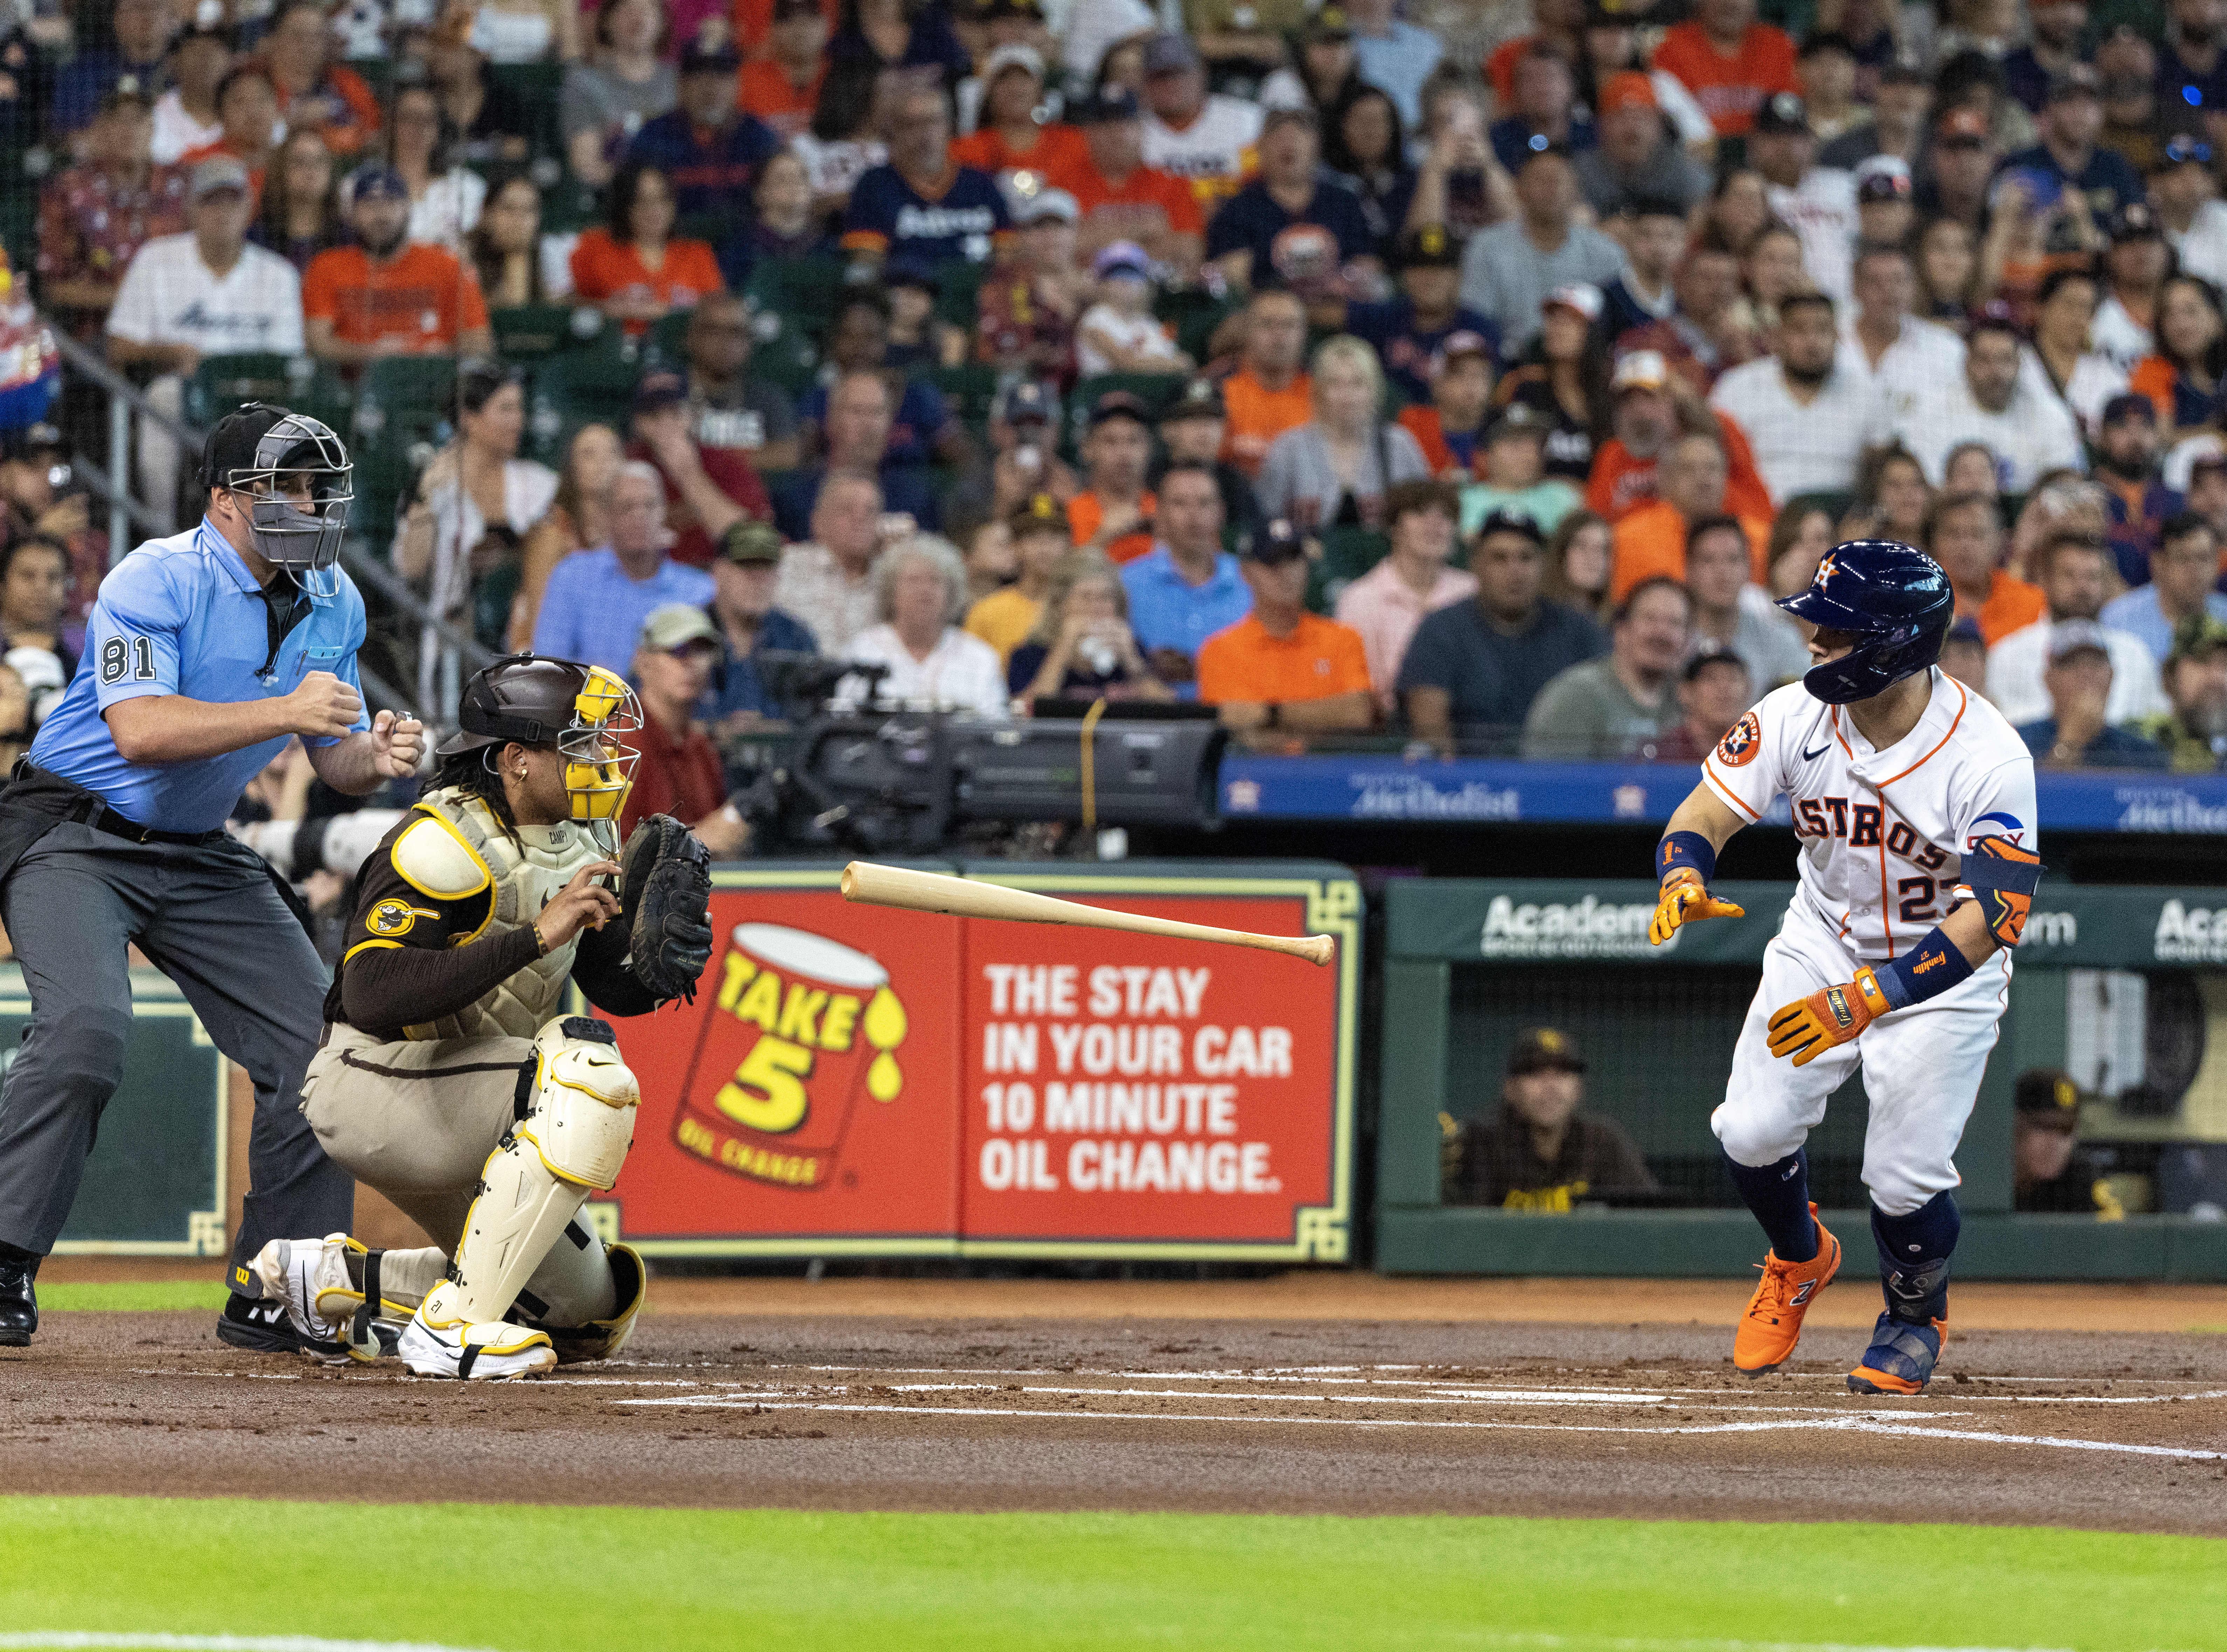 Huge two-out rally in 8th propels Mariners past Astros